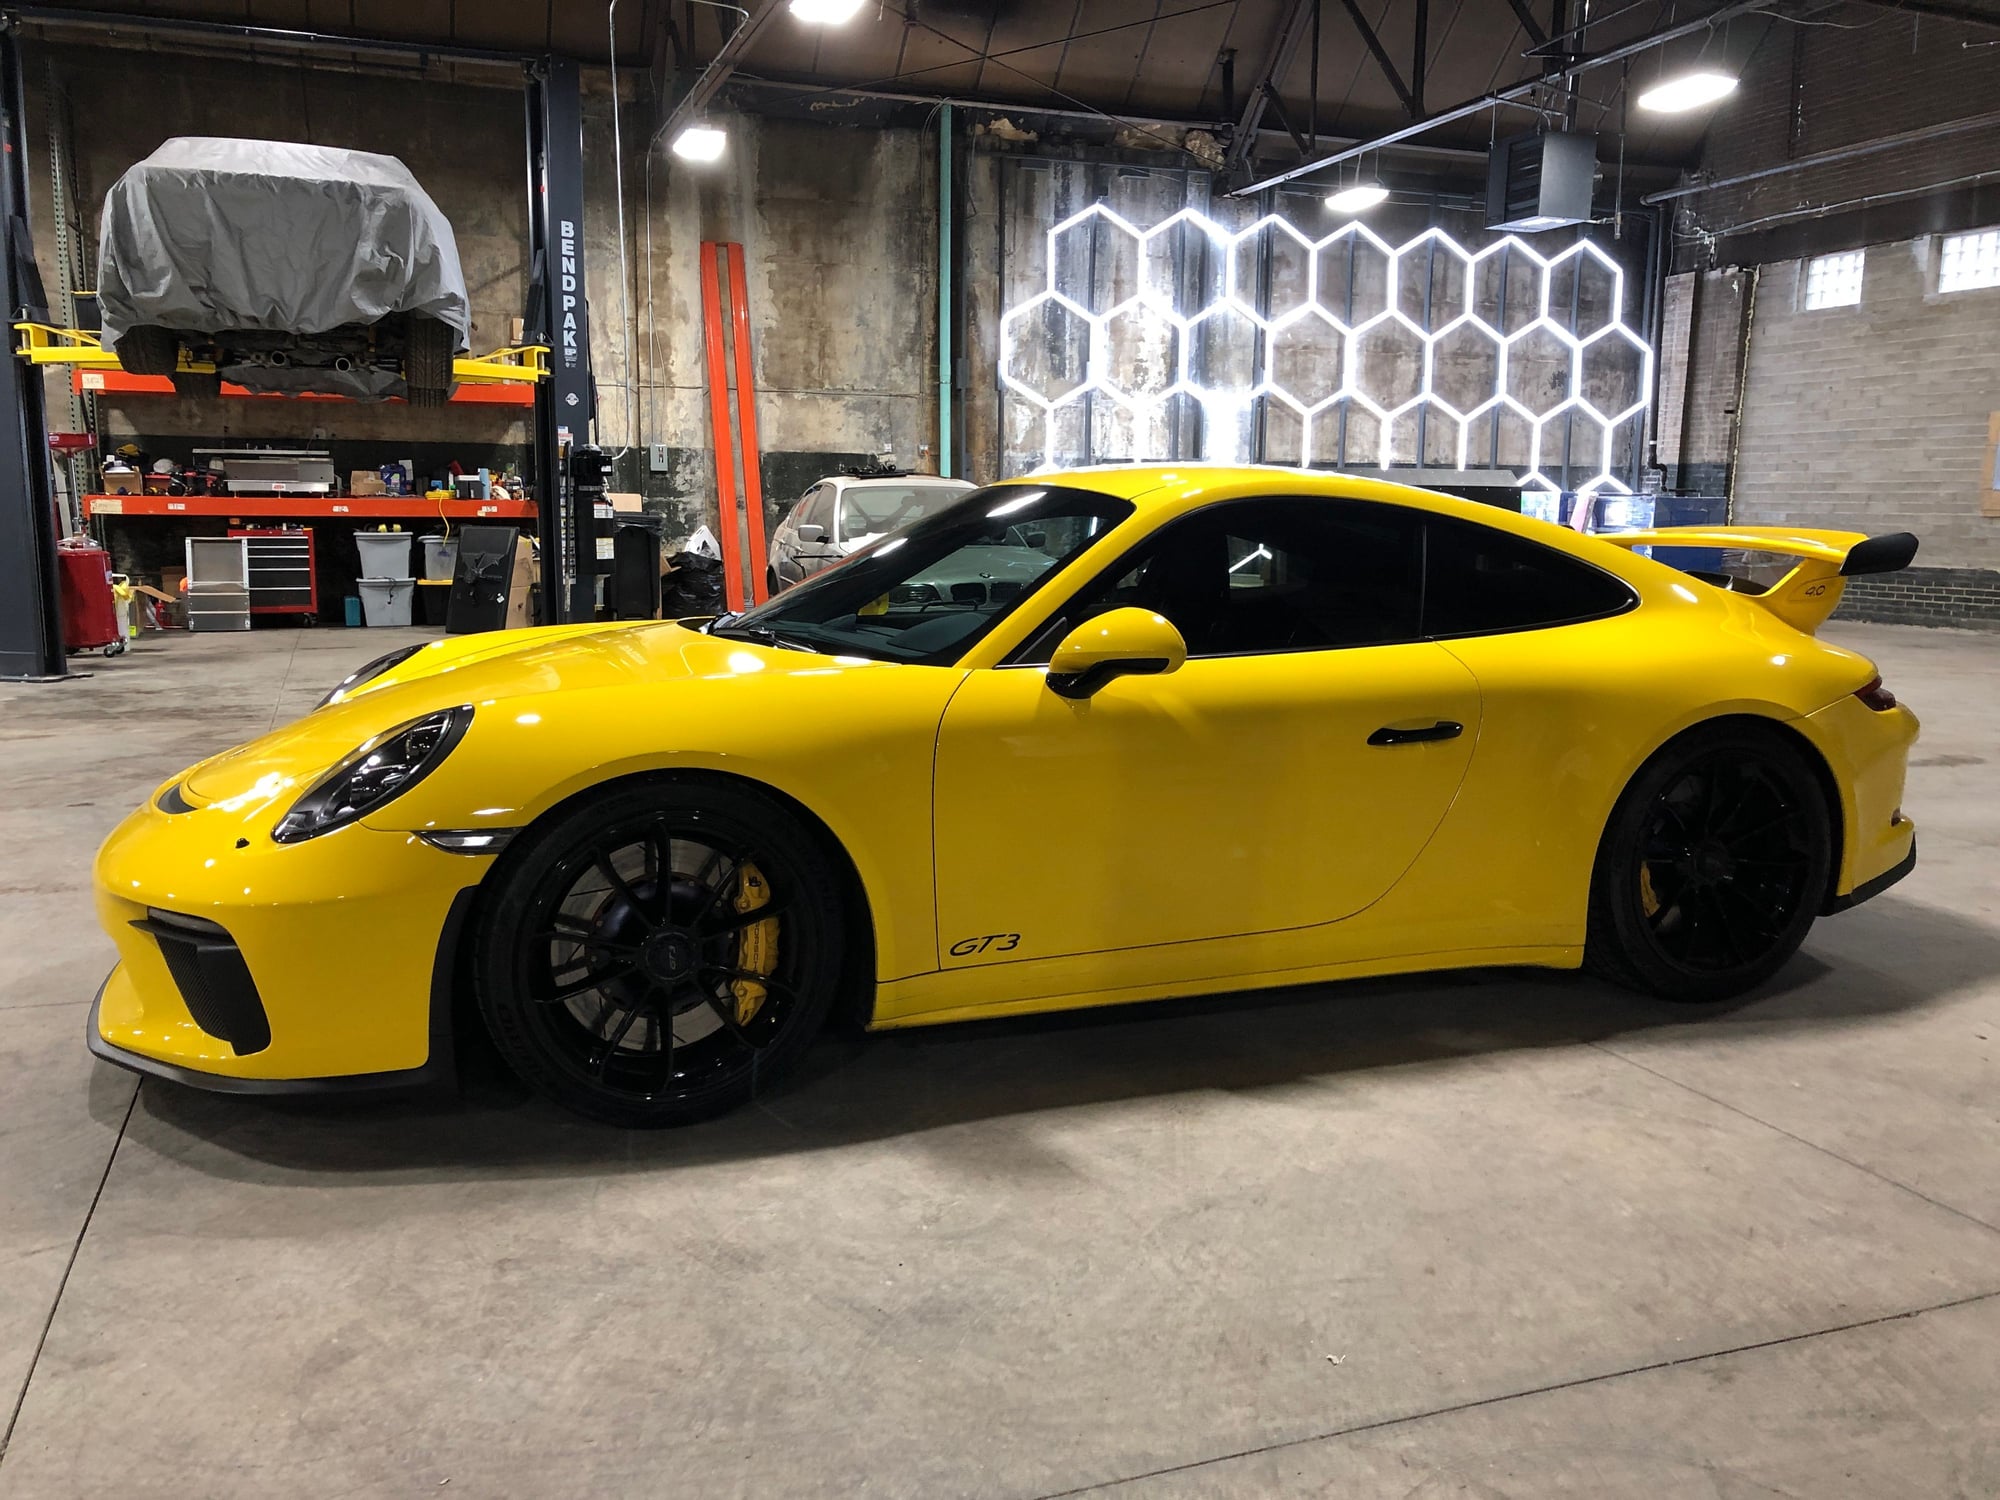 2018 Porsche GT3 - 2018 991.2 GT3 - 6 Speed - Used - VIN WP0AC2A93JS175420 - 34,360 Miles - 6 cyl - 2WD - Manual - Coupe - Yellow - Cincinnati, OH 45202, United States